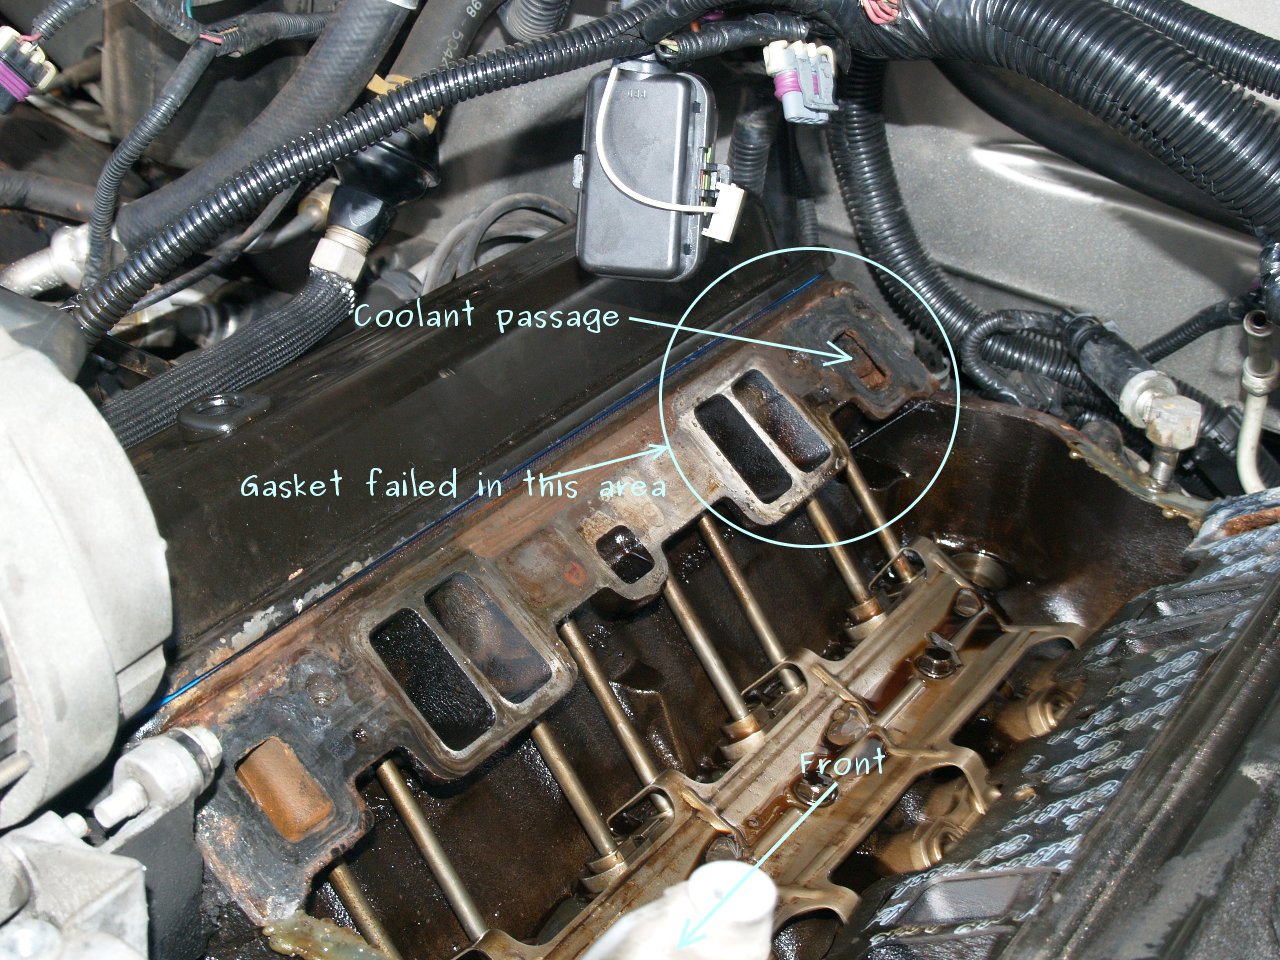 See P227E in engine